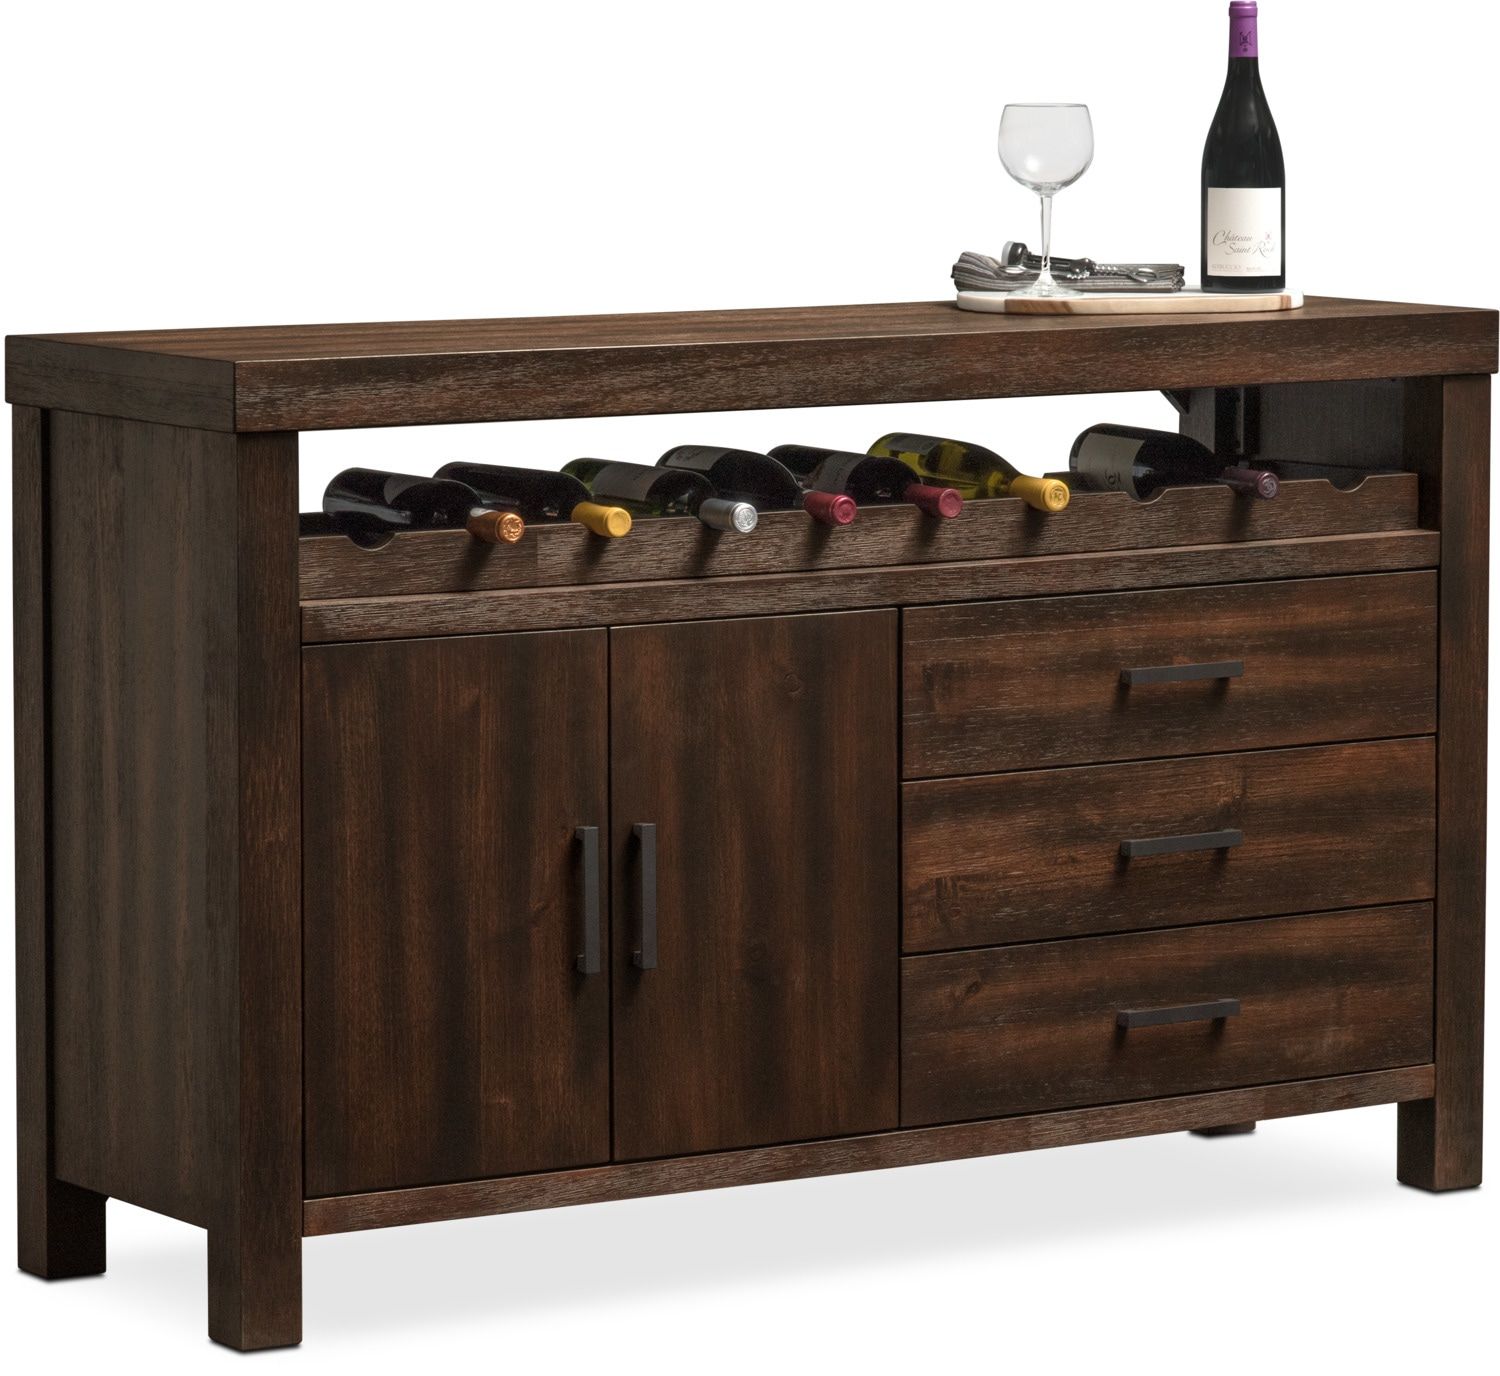 Tribeca Sideboard – Tobacco Throughout Newest Tribeca Sideboards (View 8 of 20)